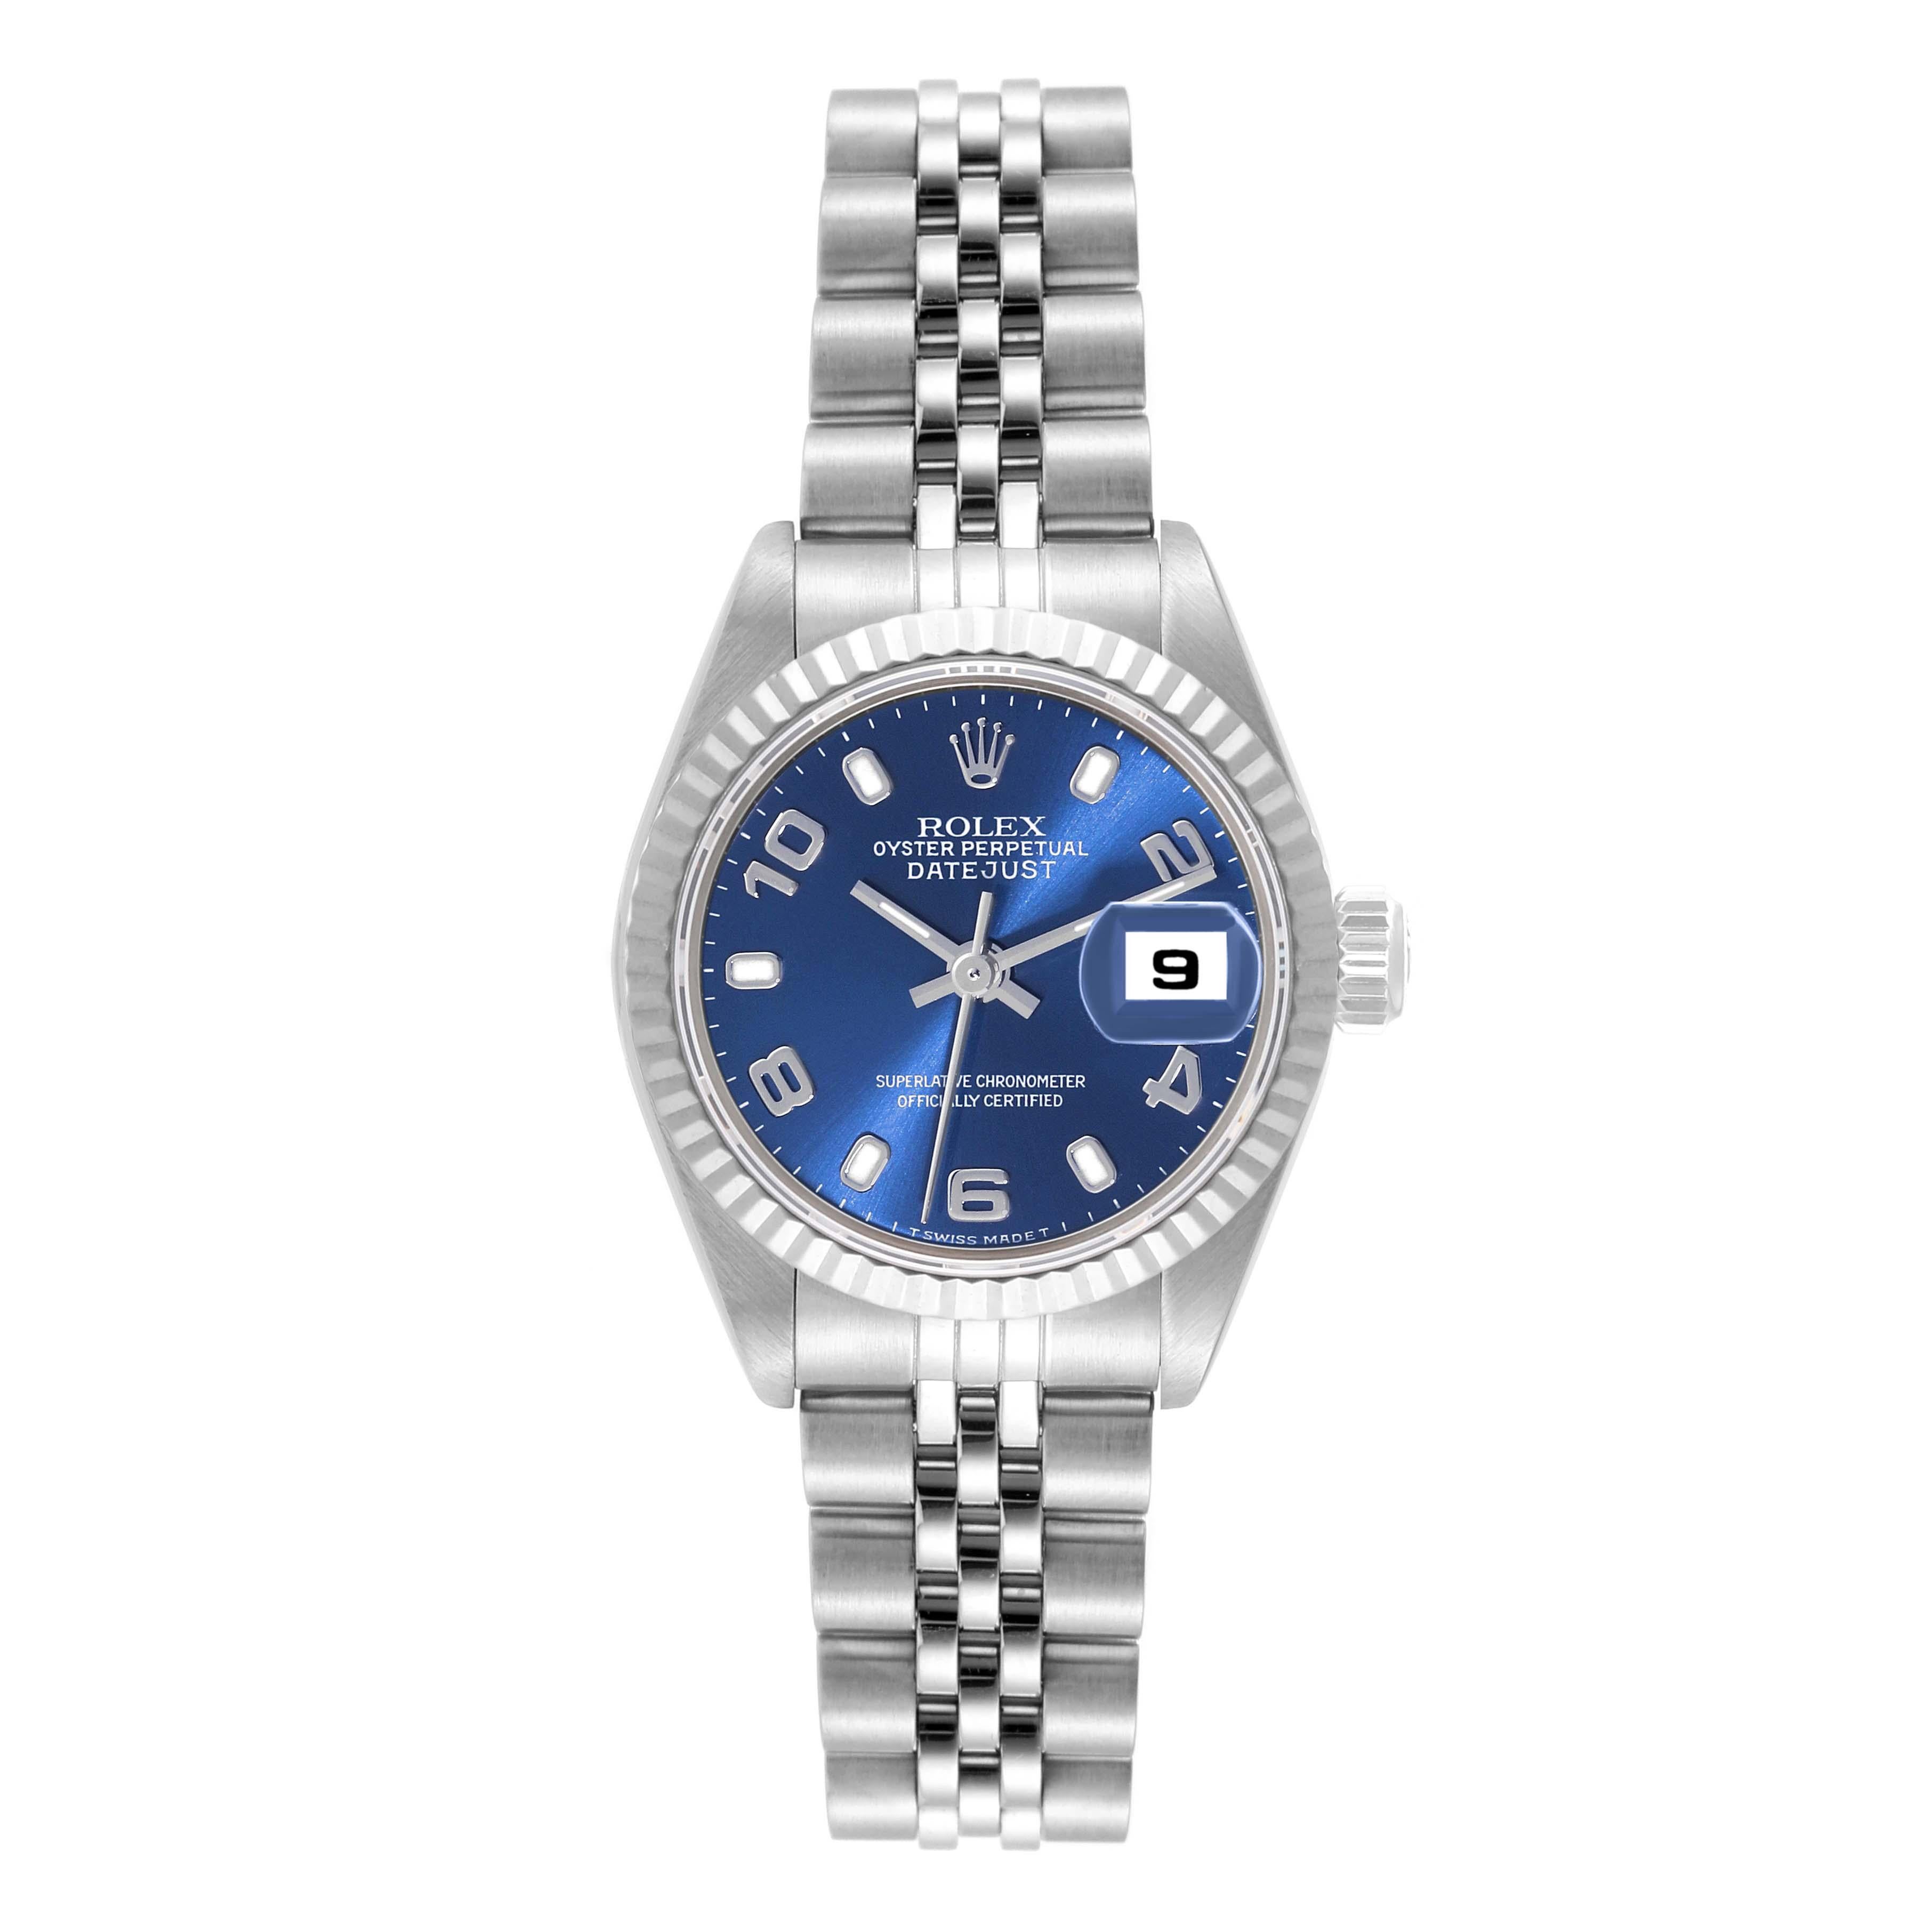 Rolex Datejust Steel White Gold Blue Dial Ladies Watch 79174. Officially certified chronometer automatic self-winding movement. Stainless steel oyster case 26.0 mm in diameter. Rolex logo on a crown. 18K white gold fluted bezel. Scratch resistant